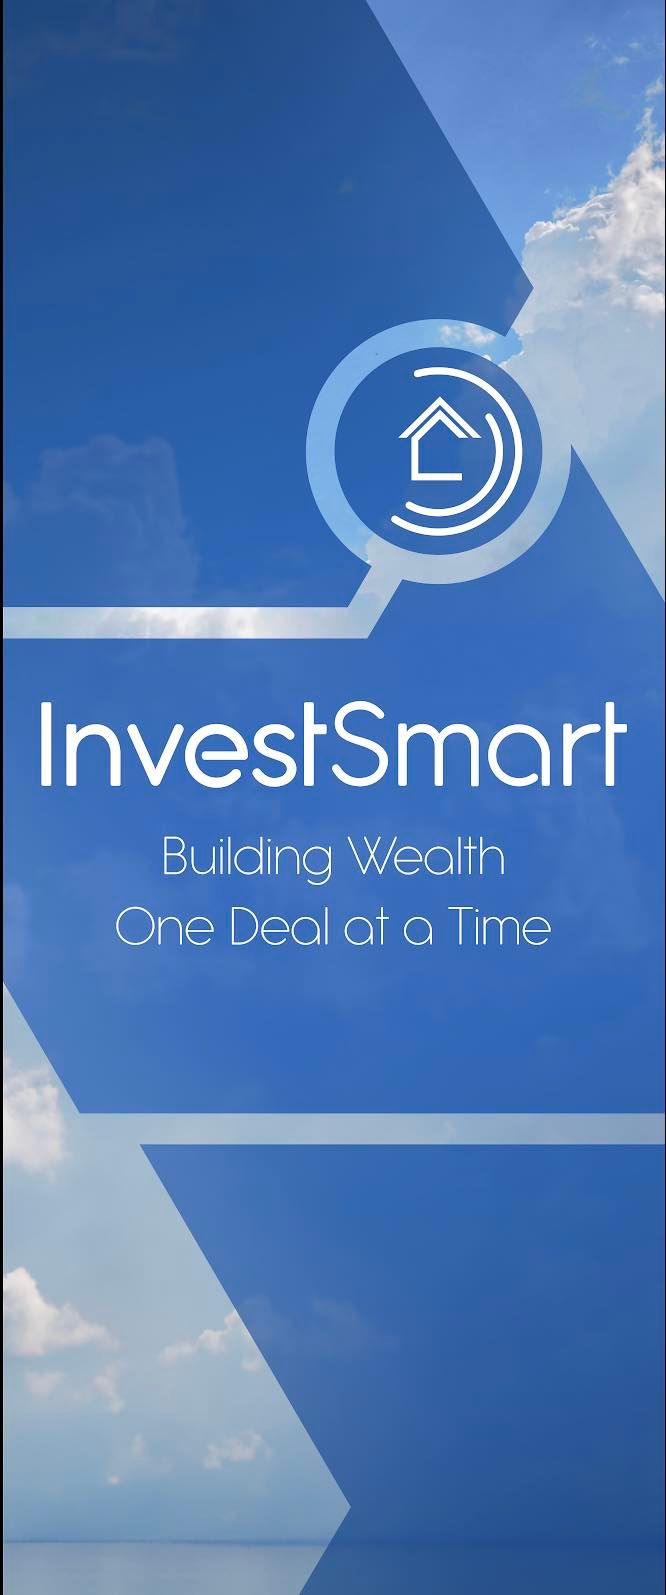 InvestSmart Aug 3rd Real Estate Investment Meeting